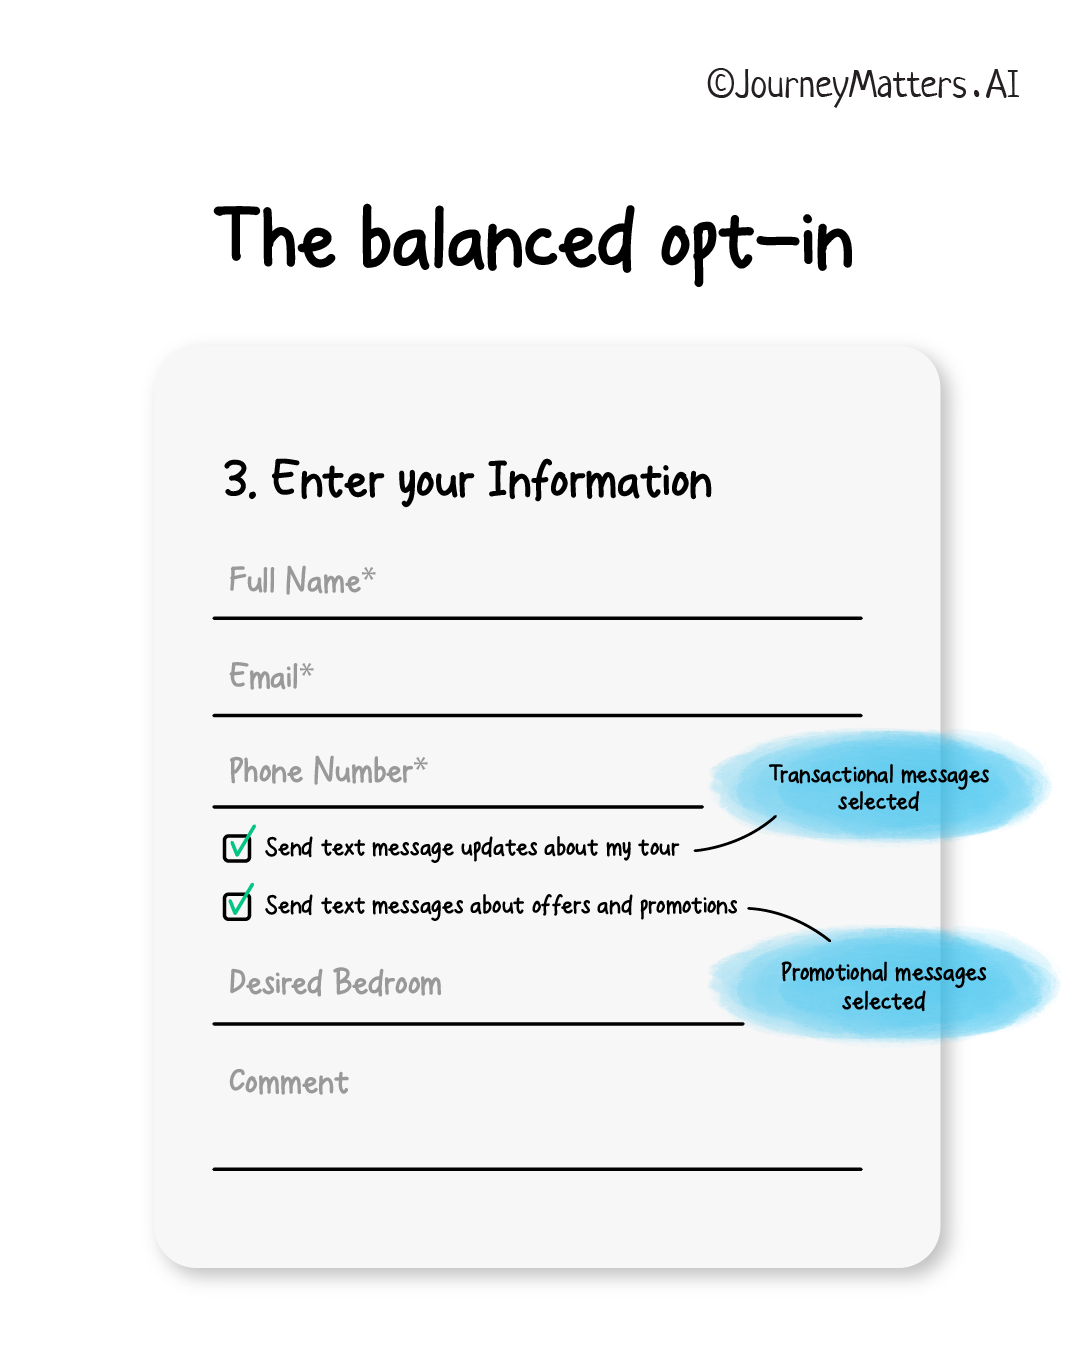 Balanced opt-in uses separate opt-ins for promotional and transactional messages and the prospect can opt for any one or both. 